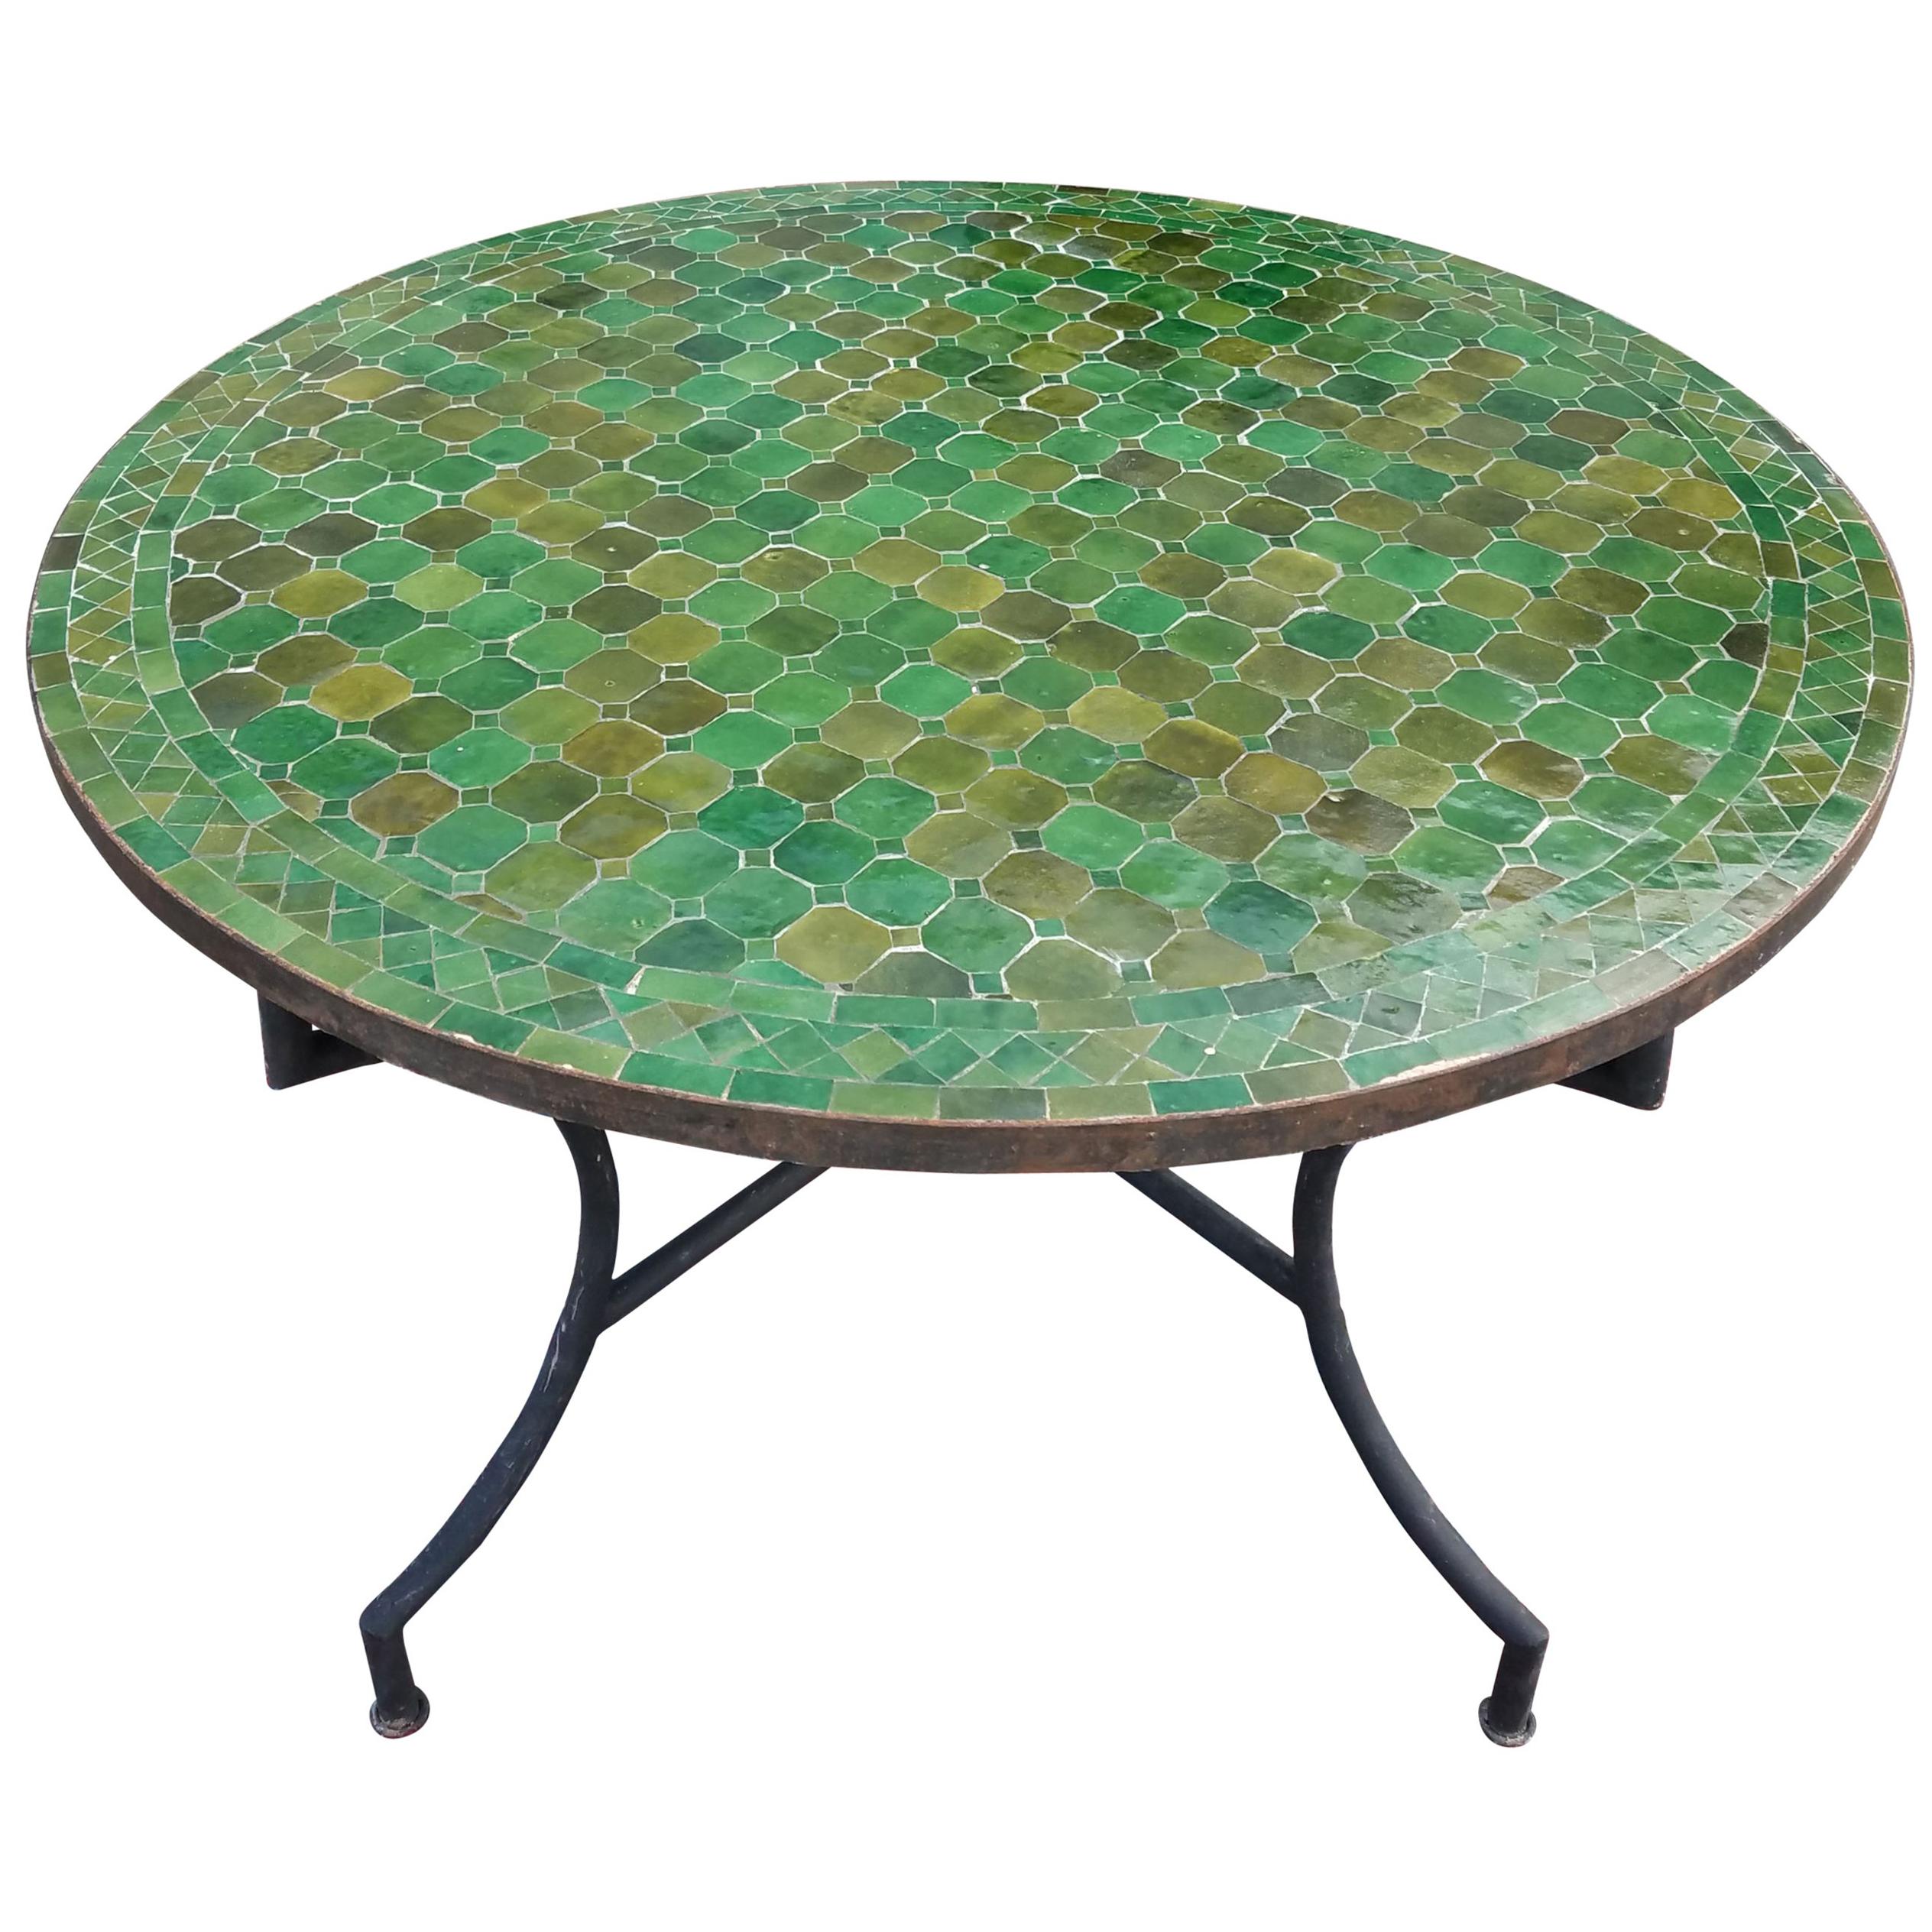 Round Moroccan Mosaic Table, Tamegroute Green